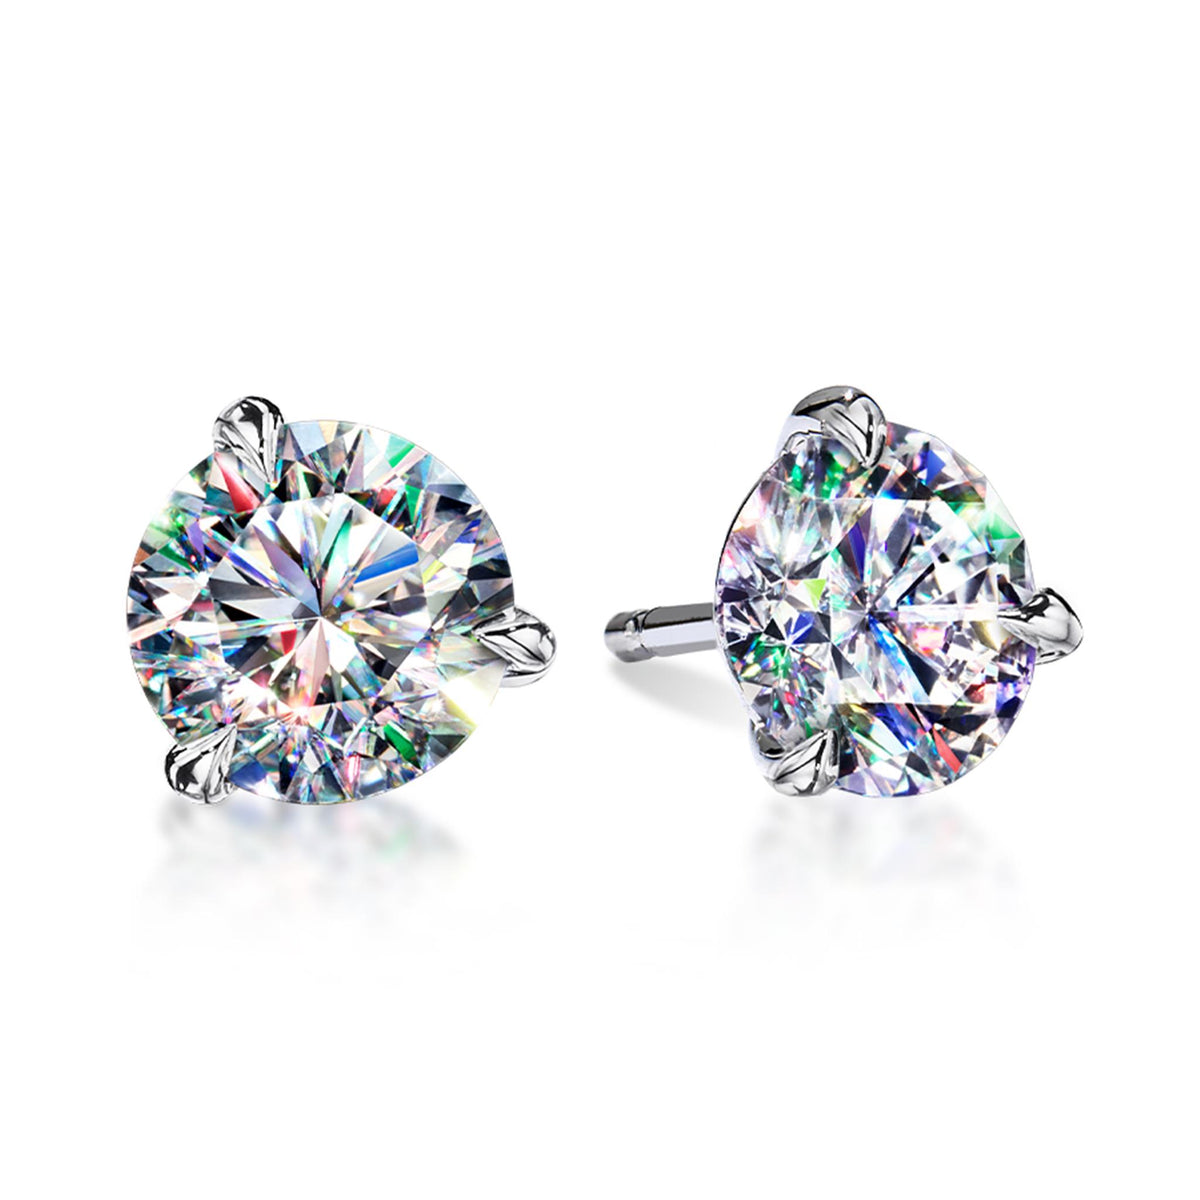 Facets Of Fire 14Kt White Gold Martini Stud Earrings With .33cttw Natural Diamonds